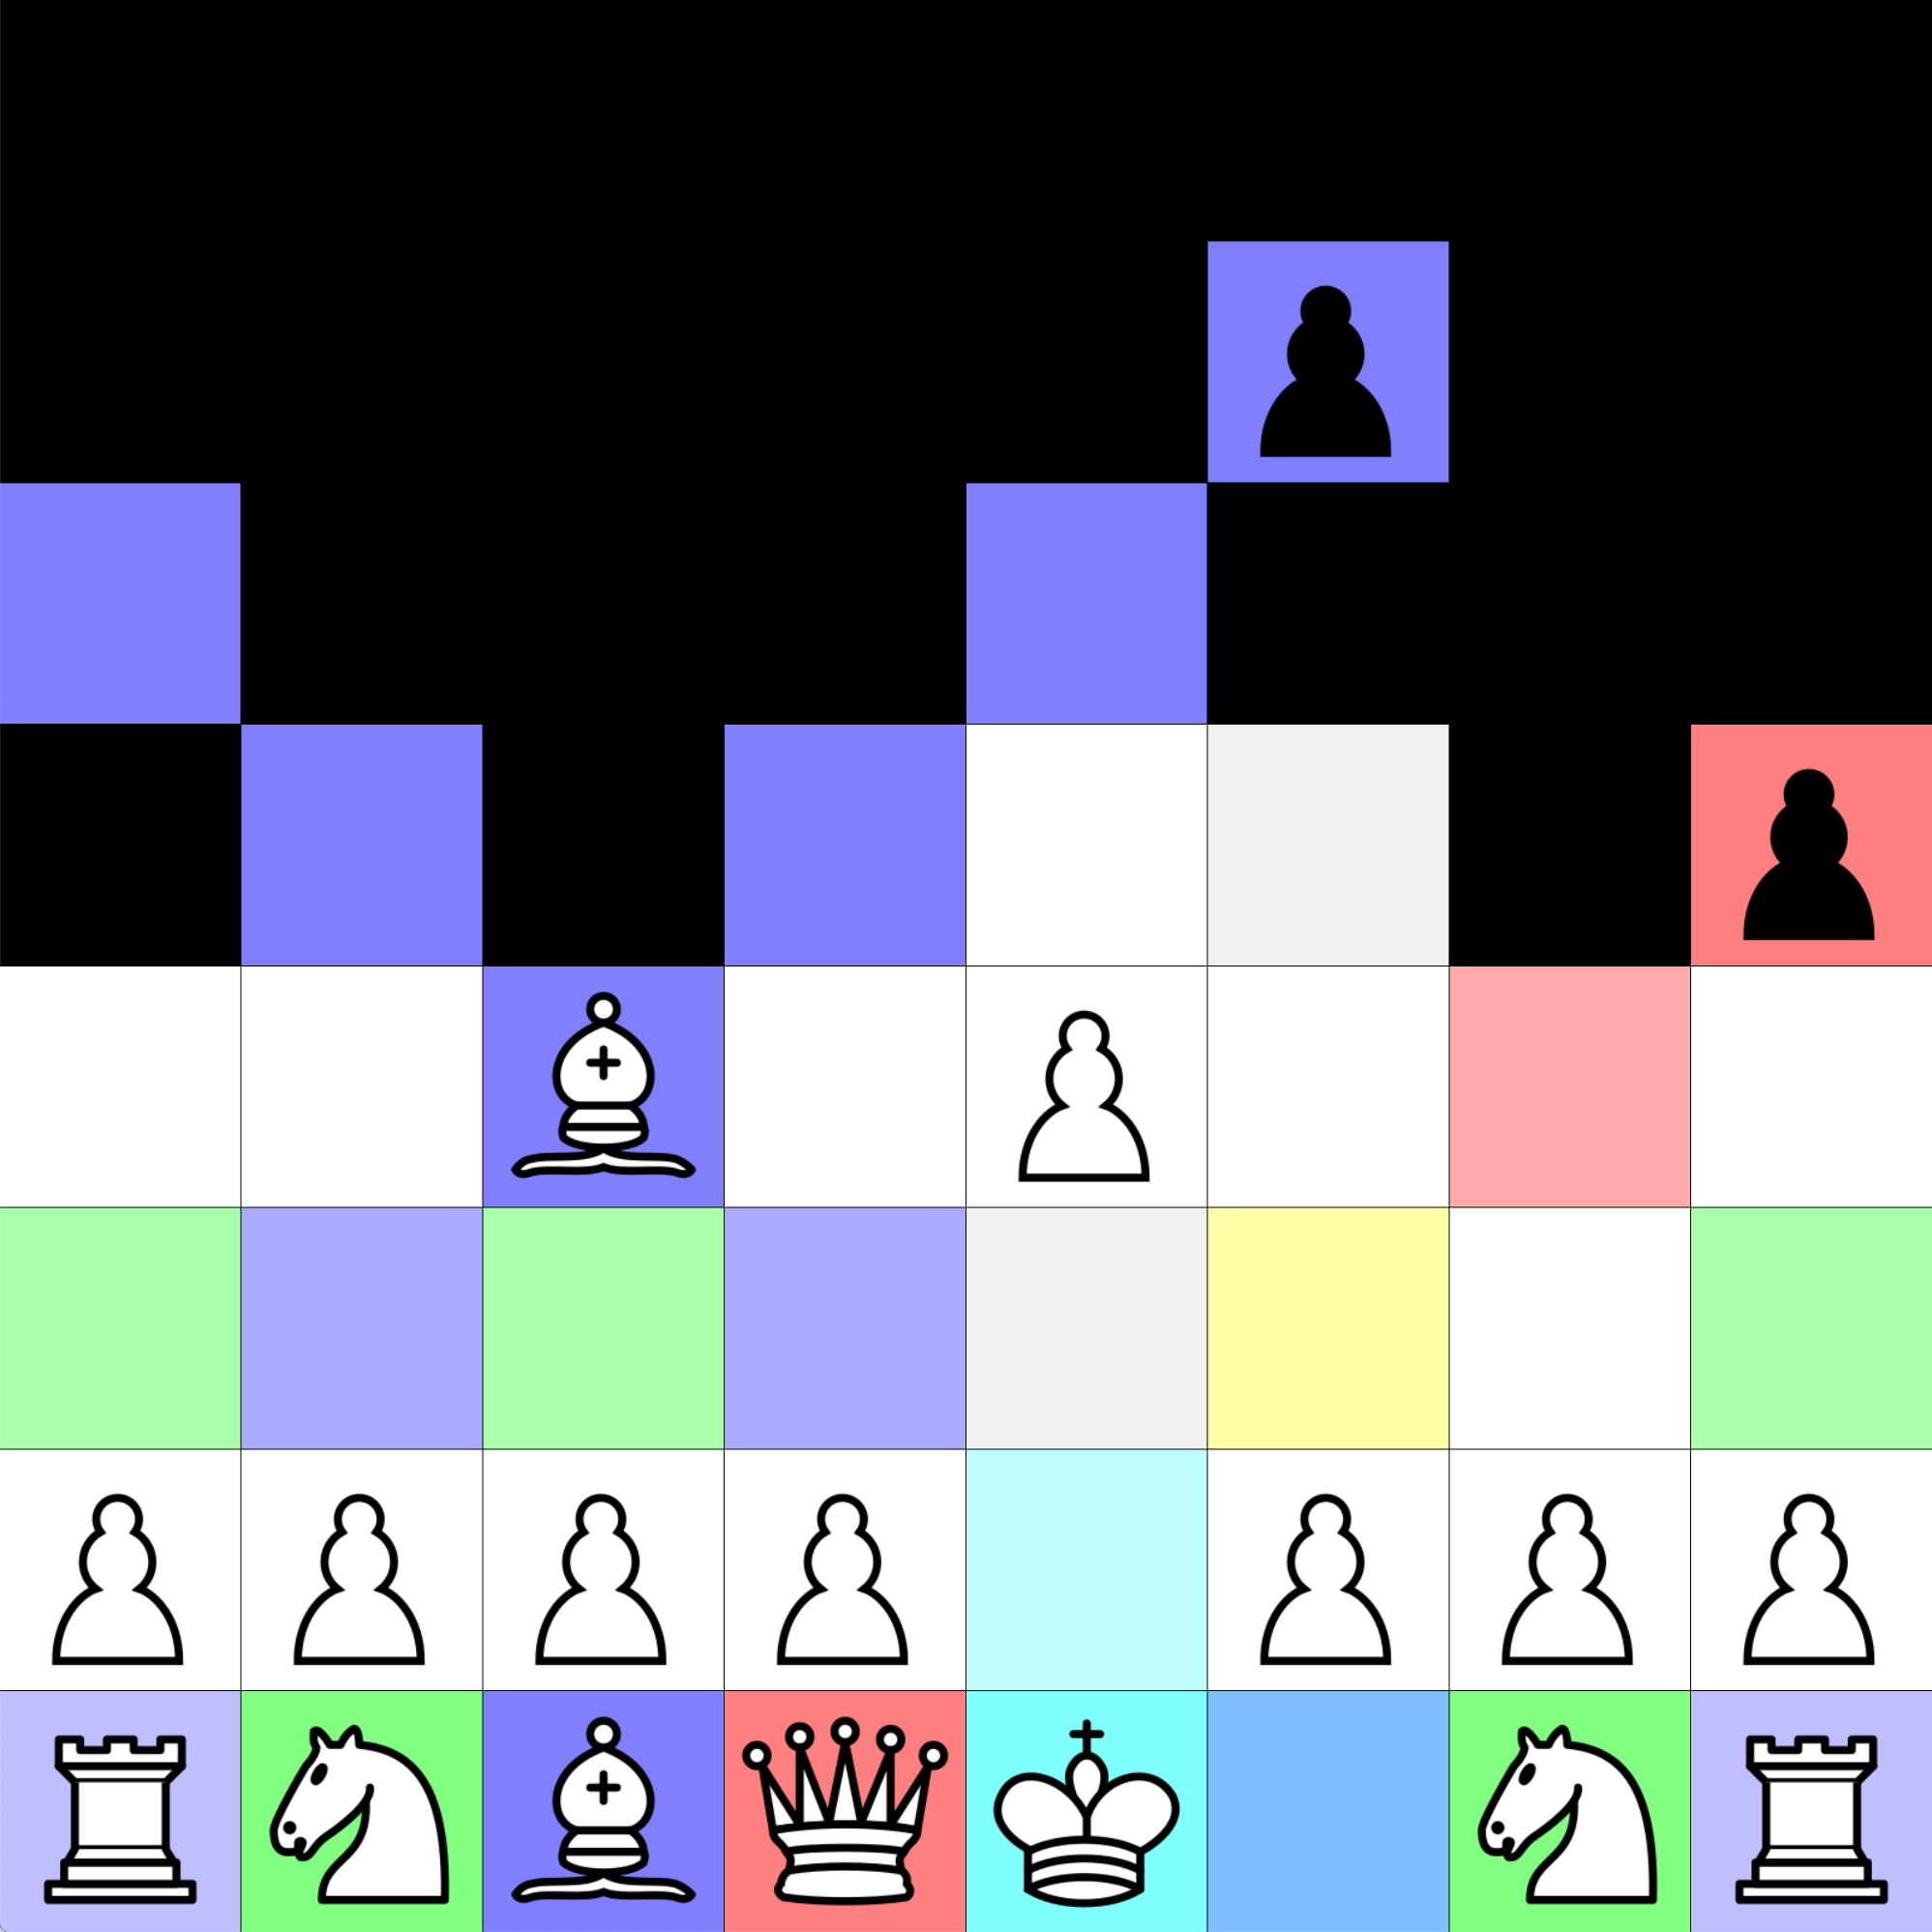 GitHub - themennice/bethtchess: Get the next best chess move in